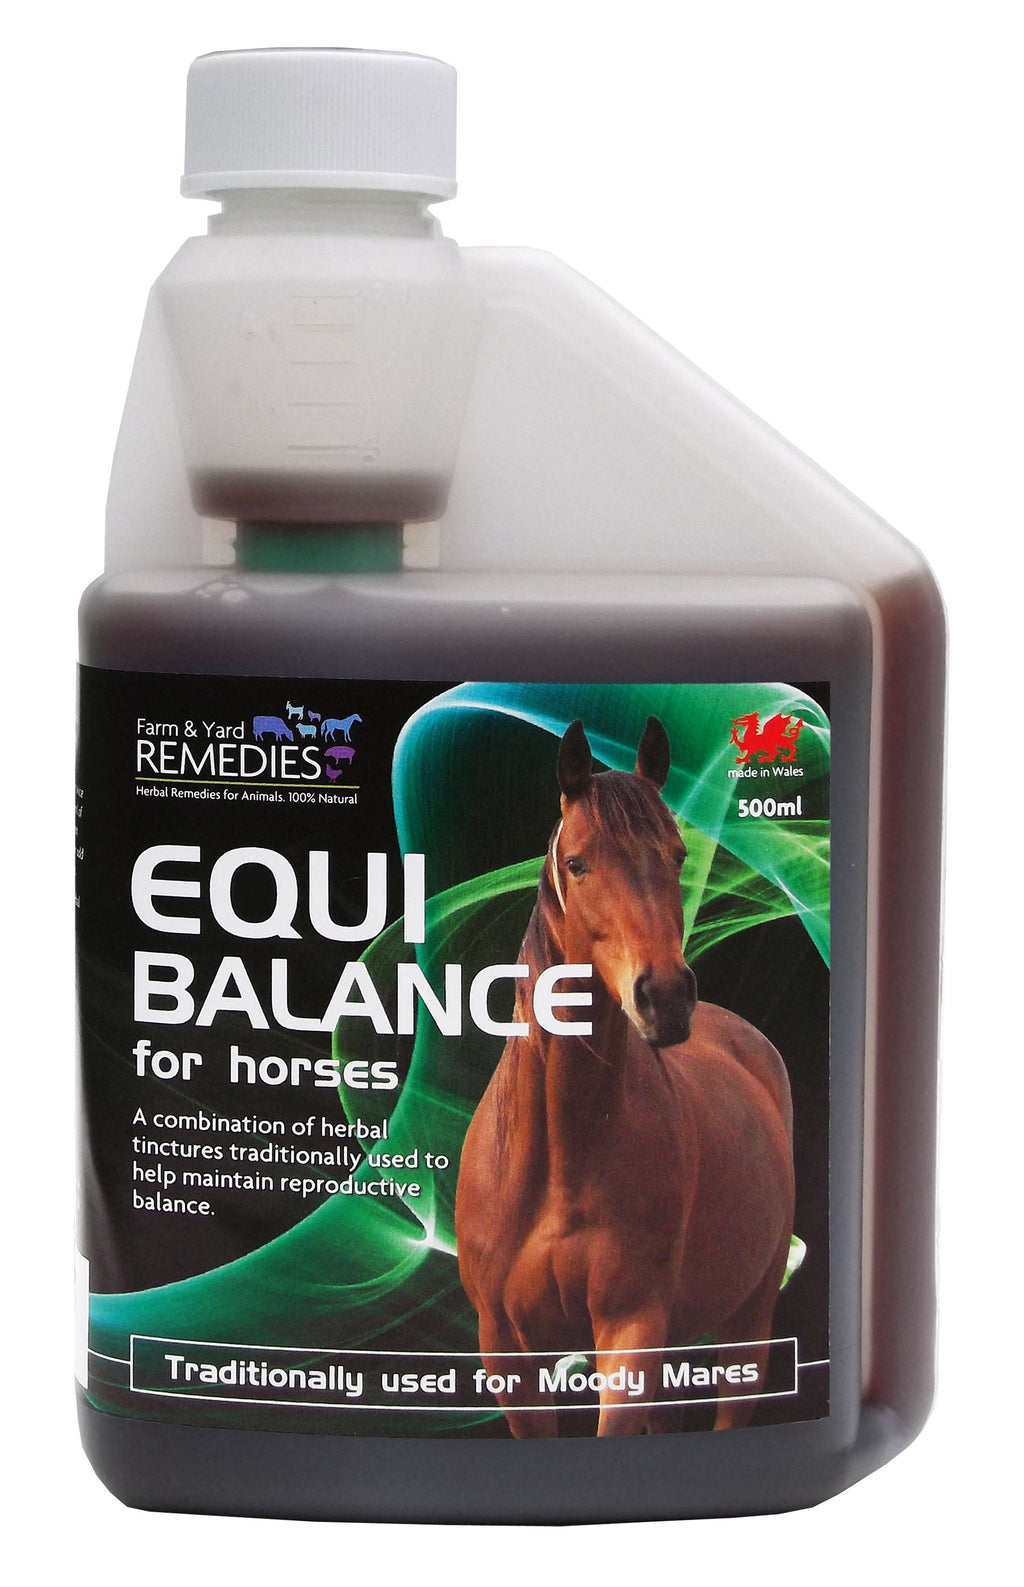 Farm and Yard Remedies Equi Balance Hormonal Support Herbal Supplement for Horses All Natural